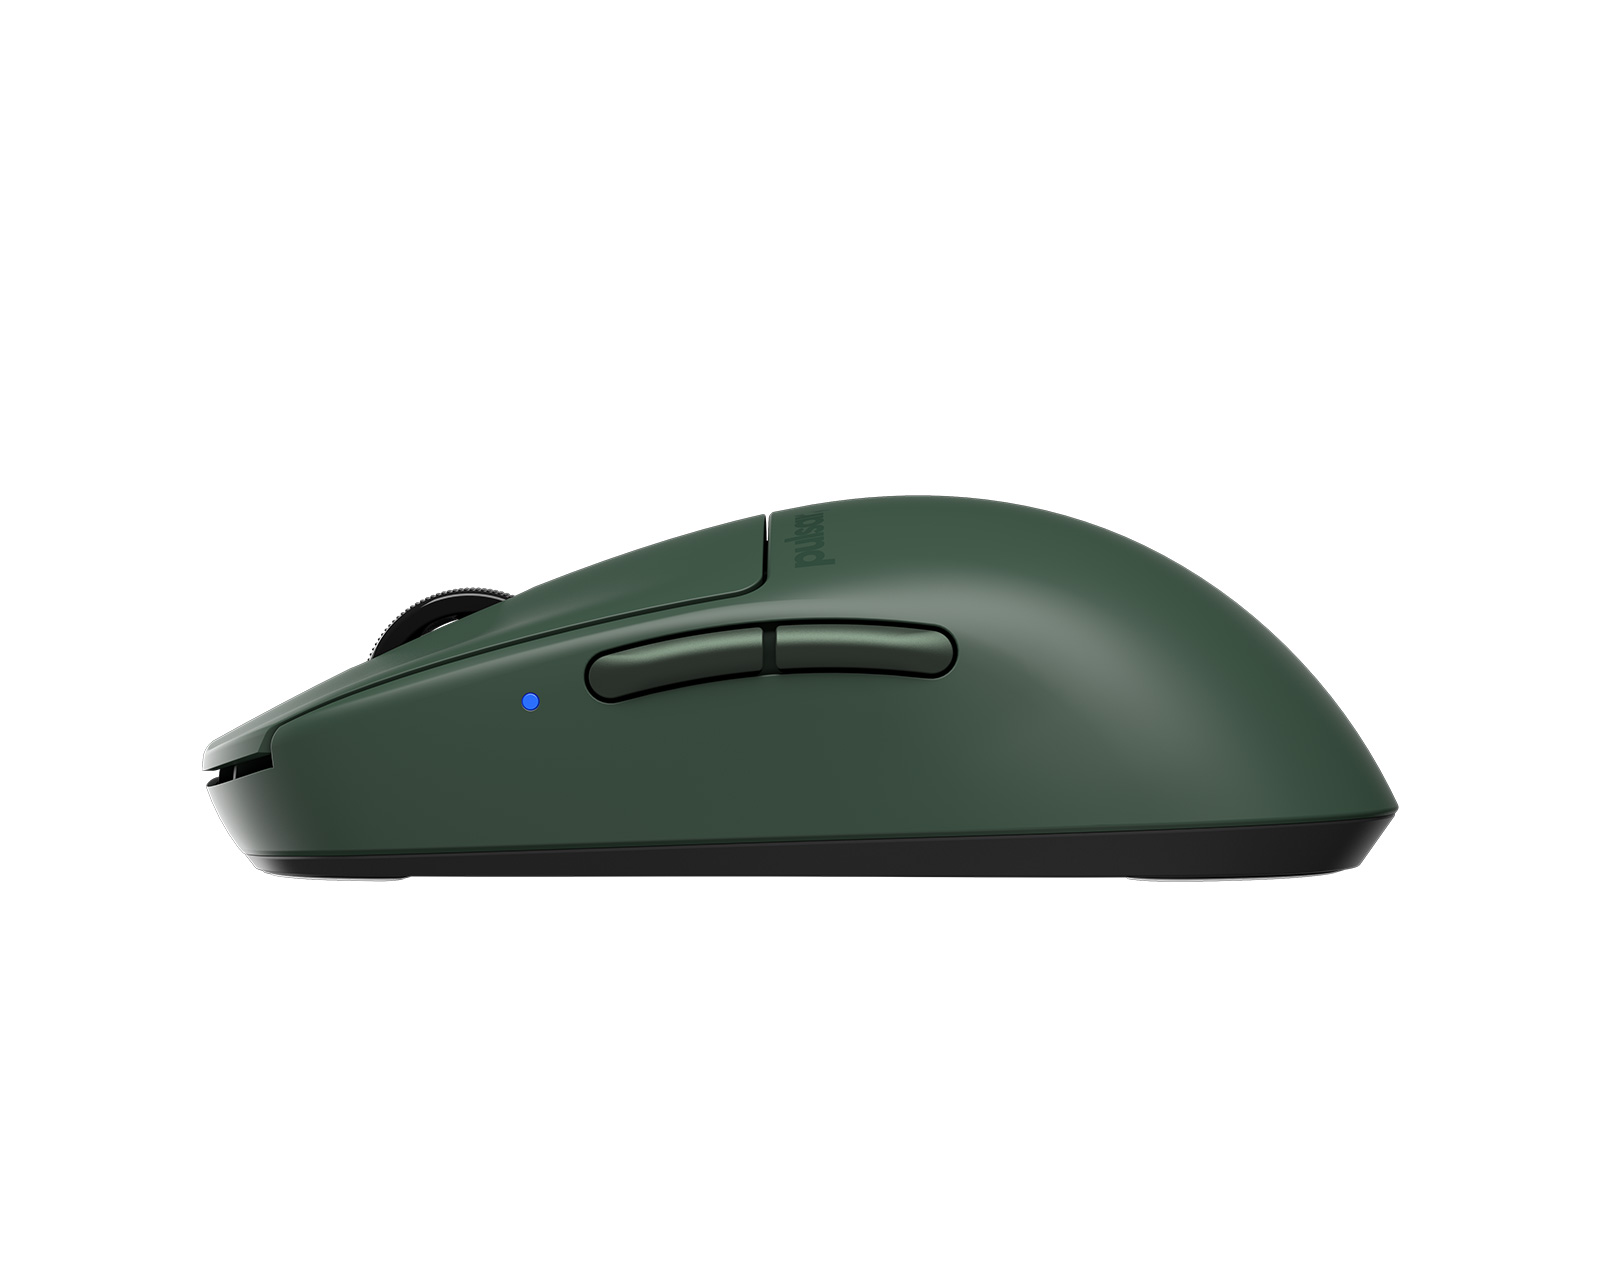 Pulsar X2-V2 4K Wireless Gaming Mouse - Mini - Green - Limited